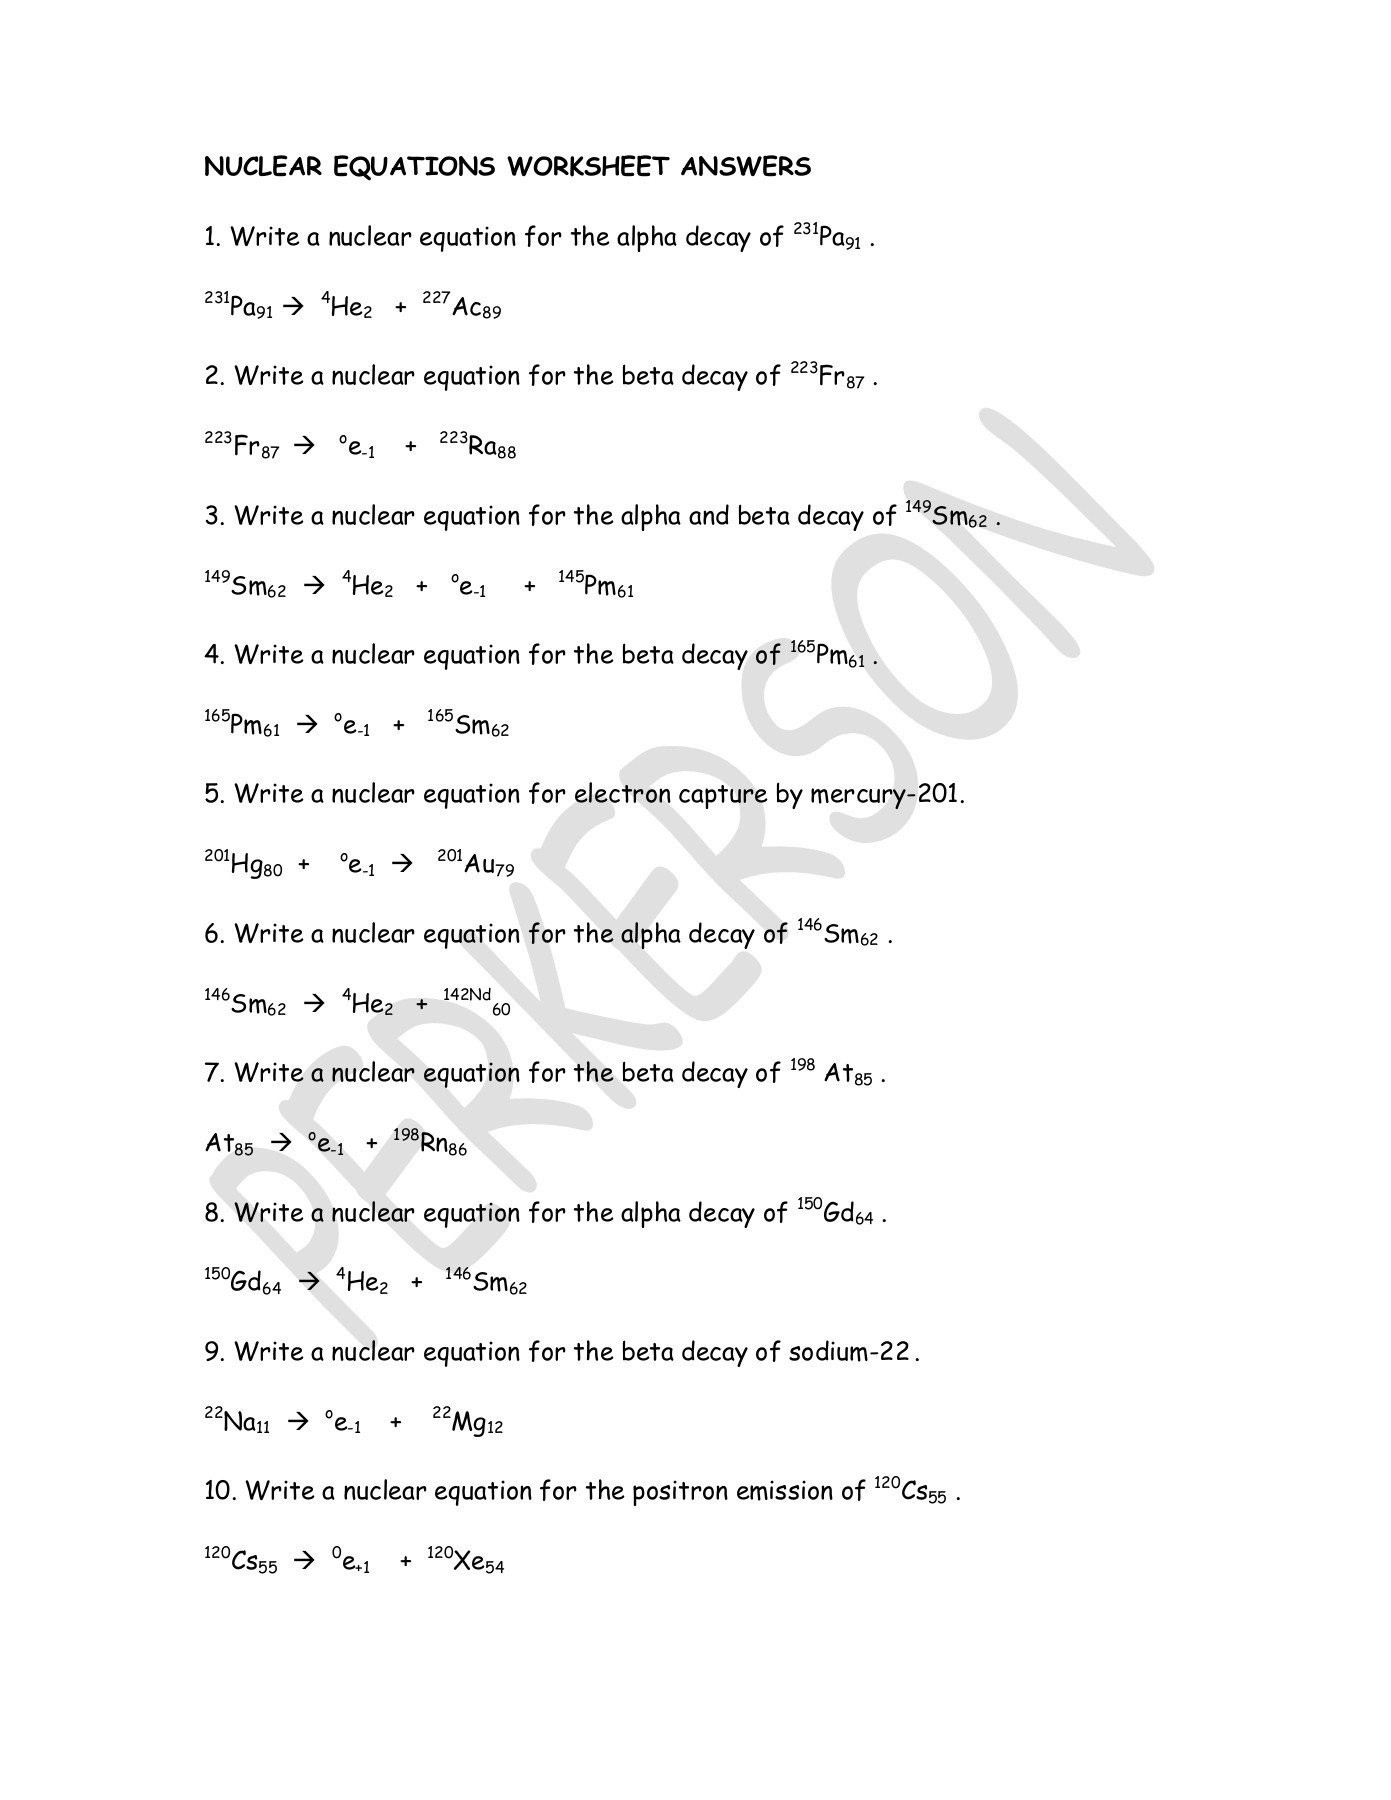 Nuclear Reactions Worksheet Answers 20 Nuclear Equations Worksheet Answers